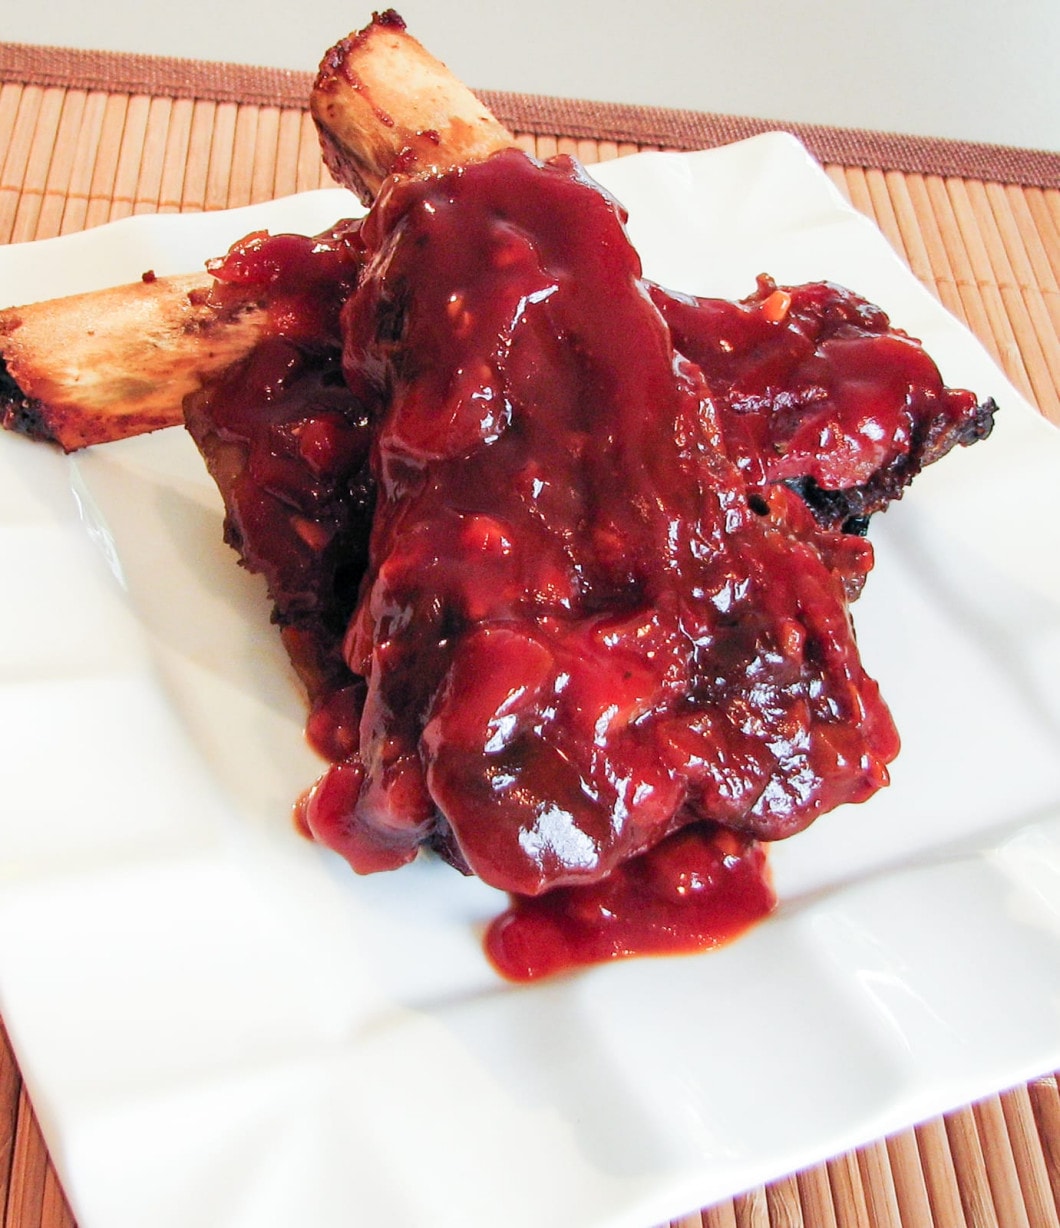 Baked Barbecue Ribs